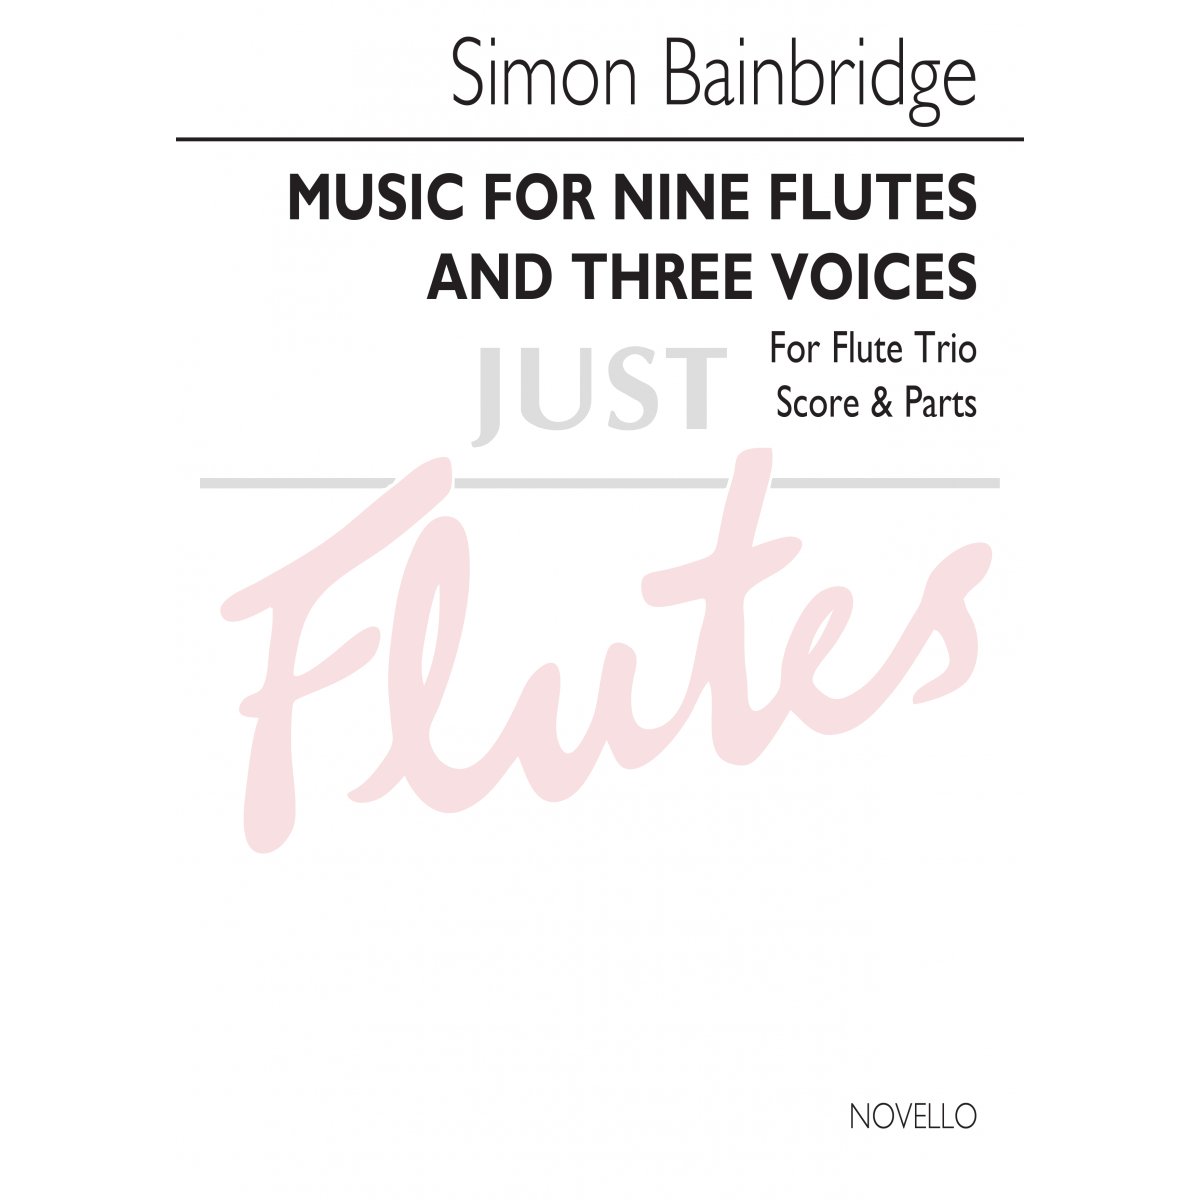 Music for Nine Flutes and Three Voices